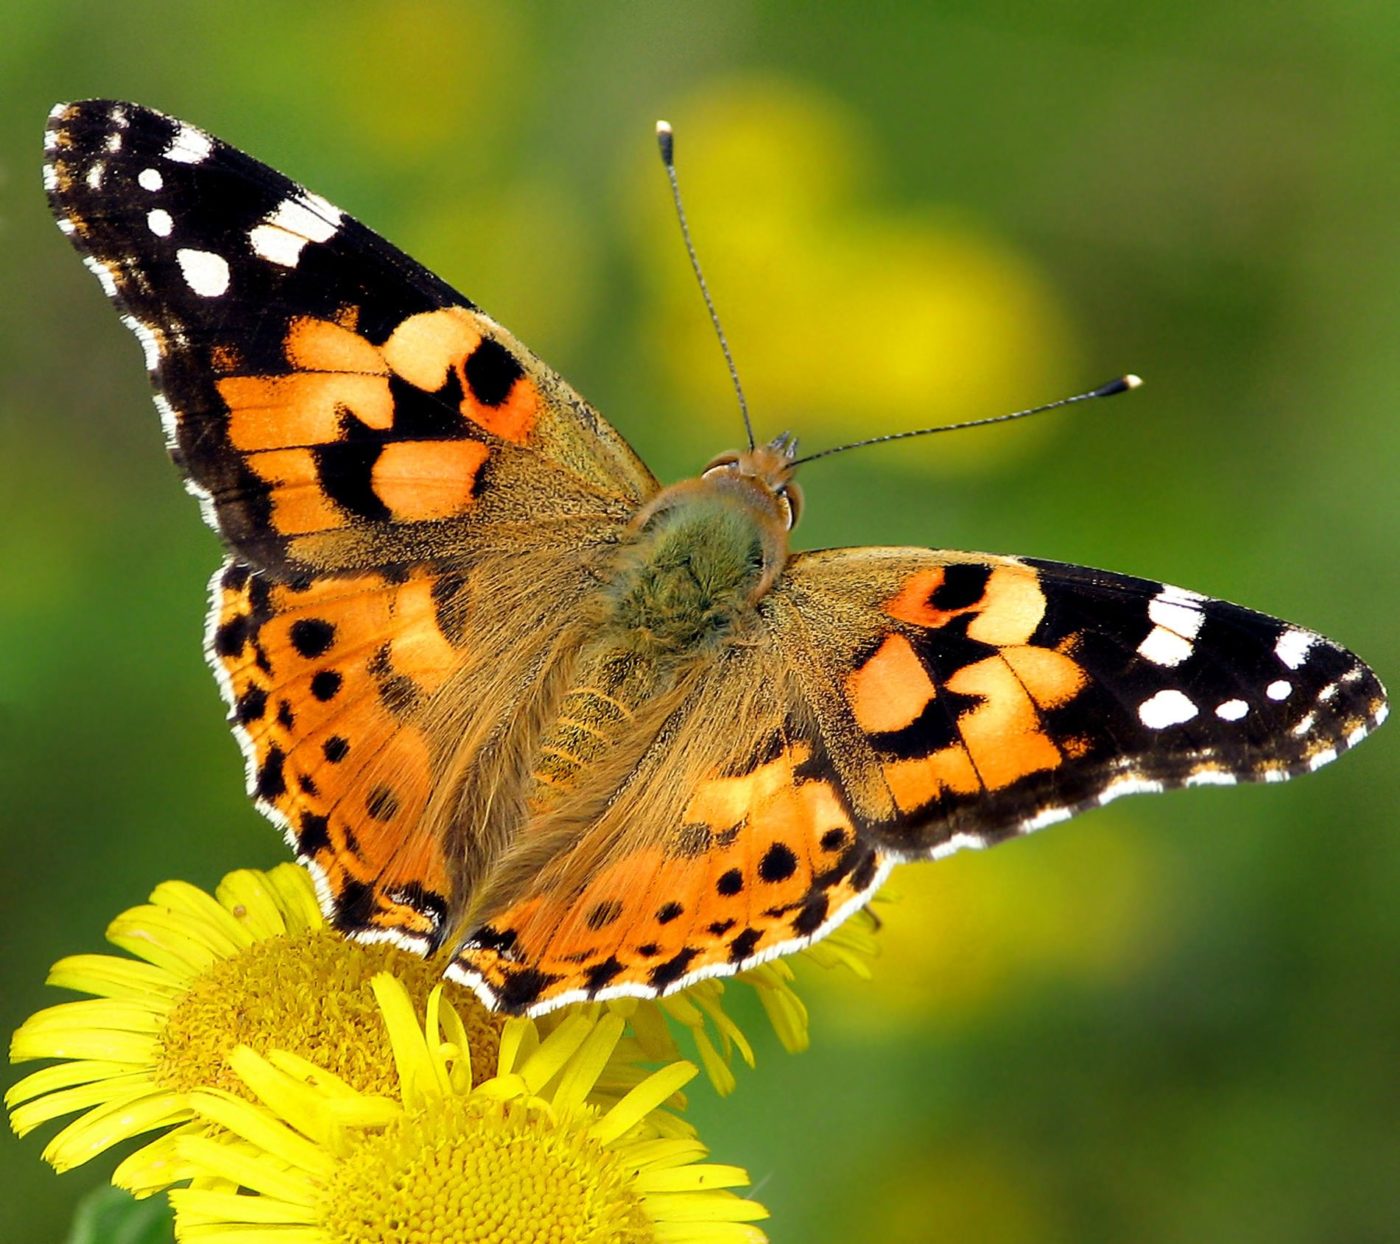 Painted Lady butterfly, Vanessa cardui